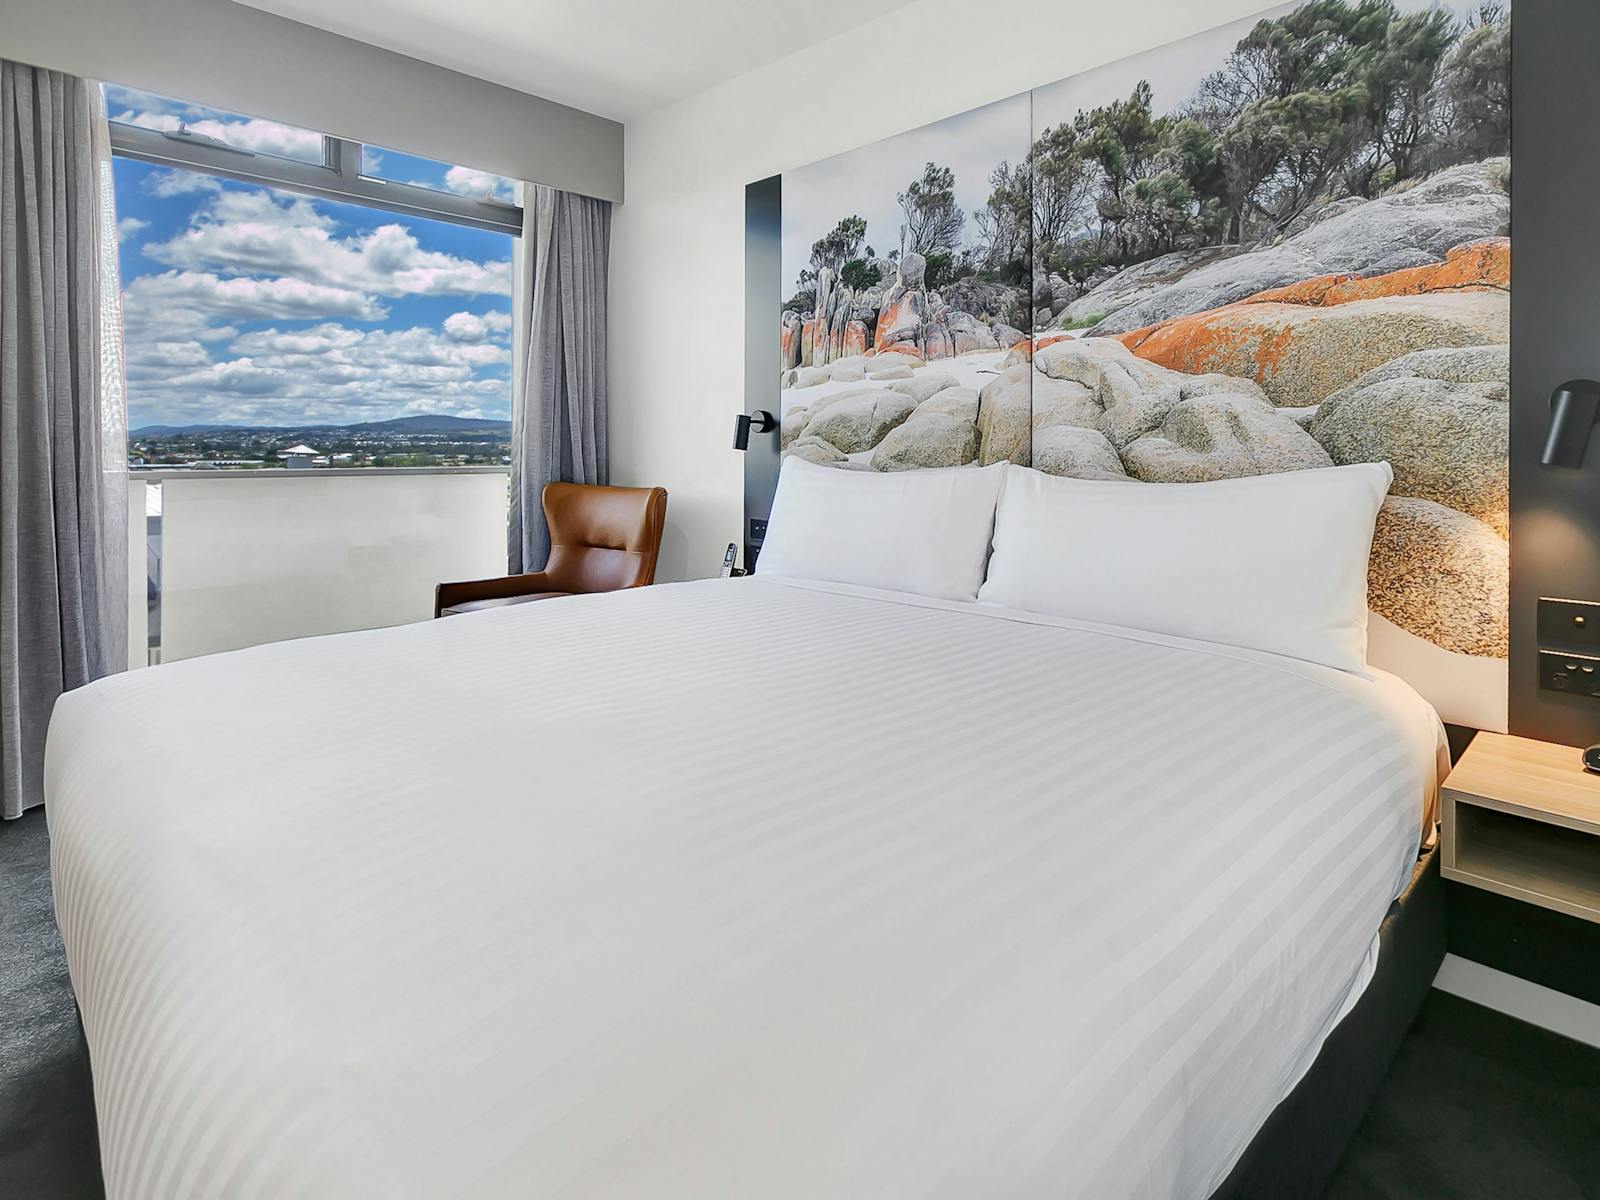 Hotel room, king bed with white linen, large picture headboard, and window with sky view.